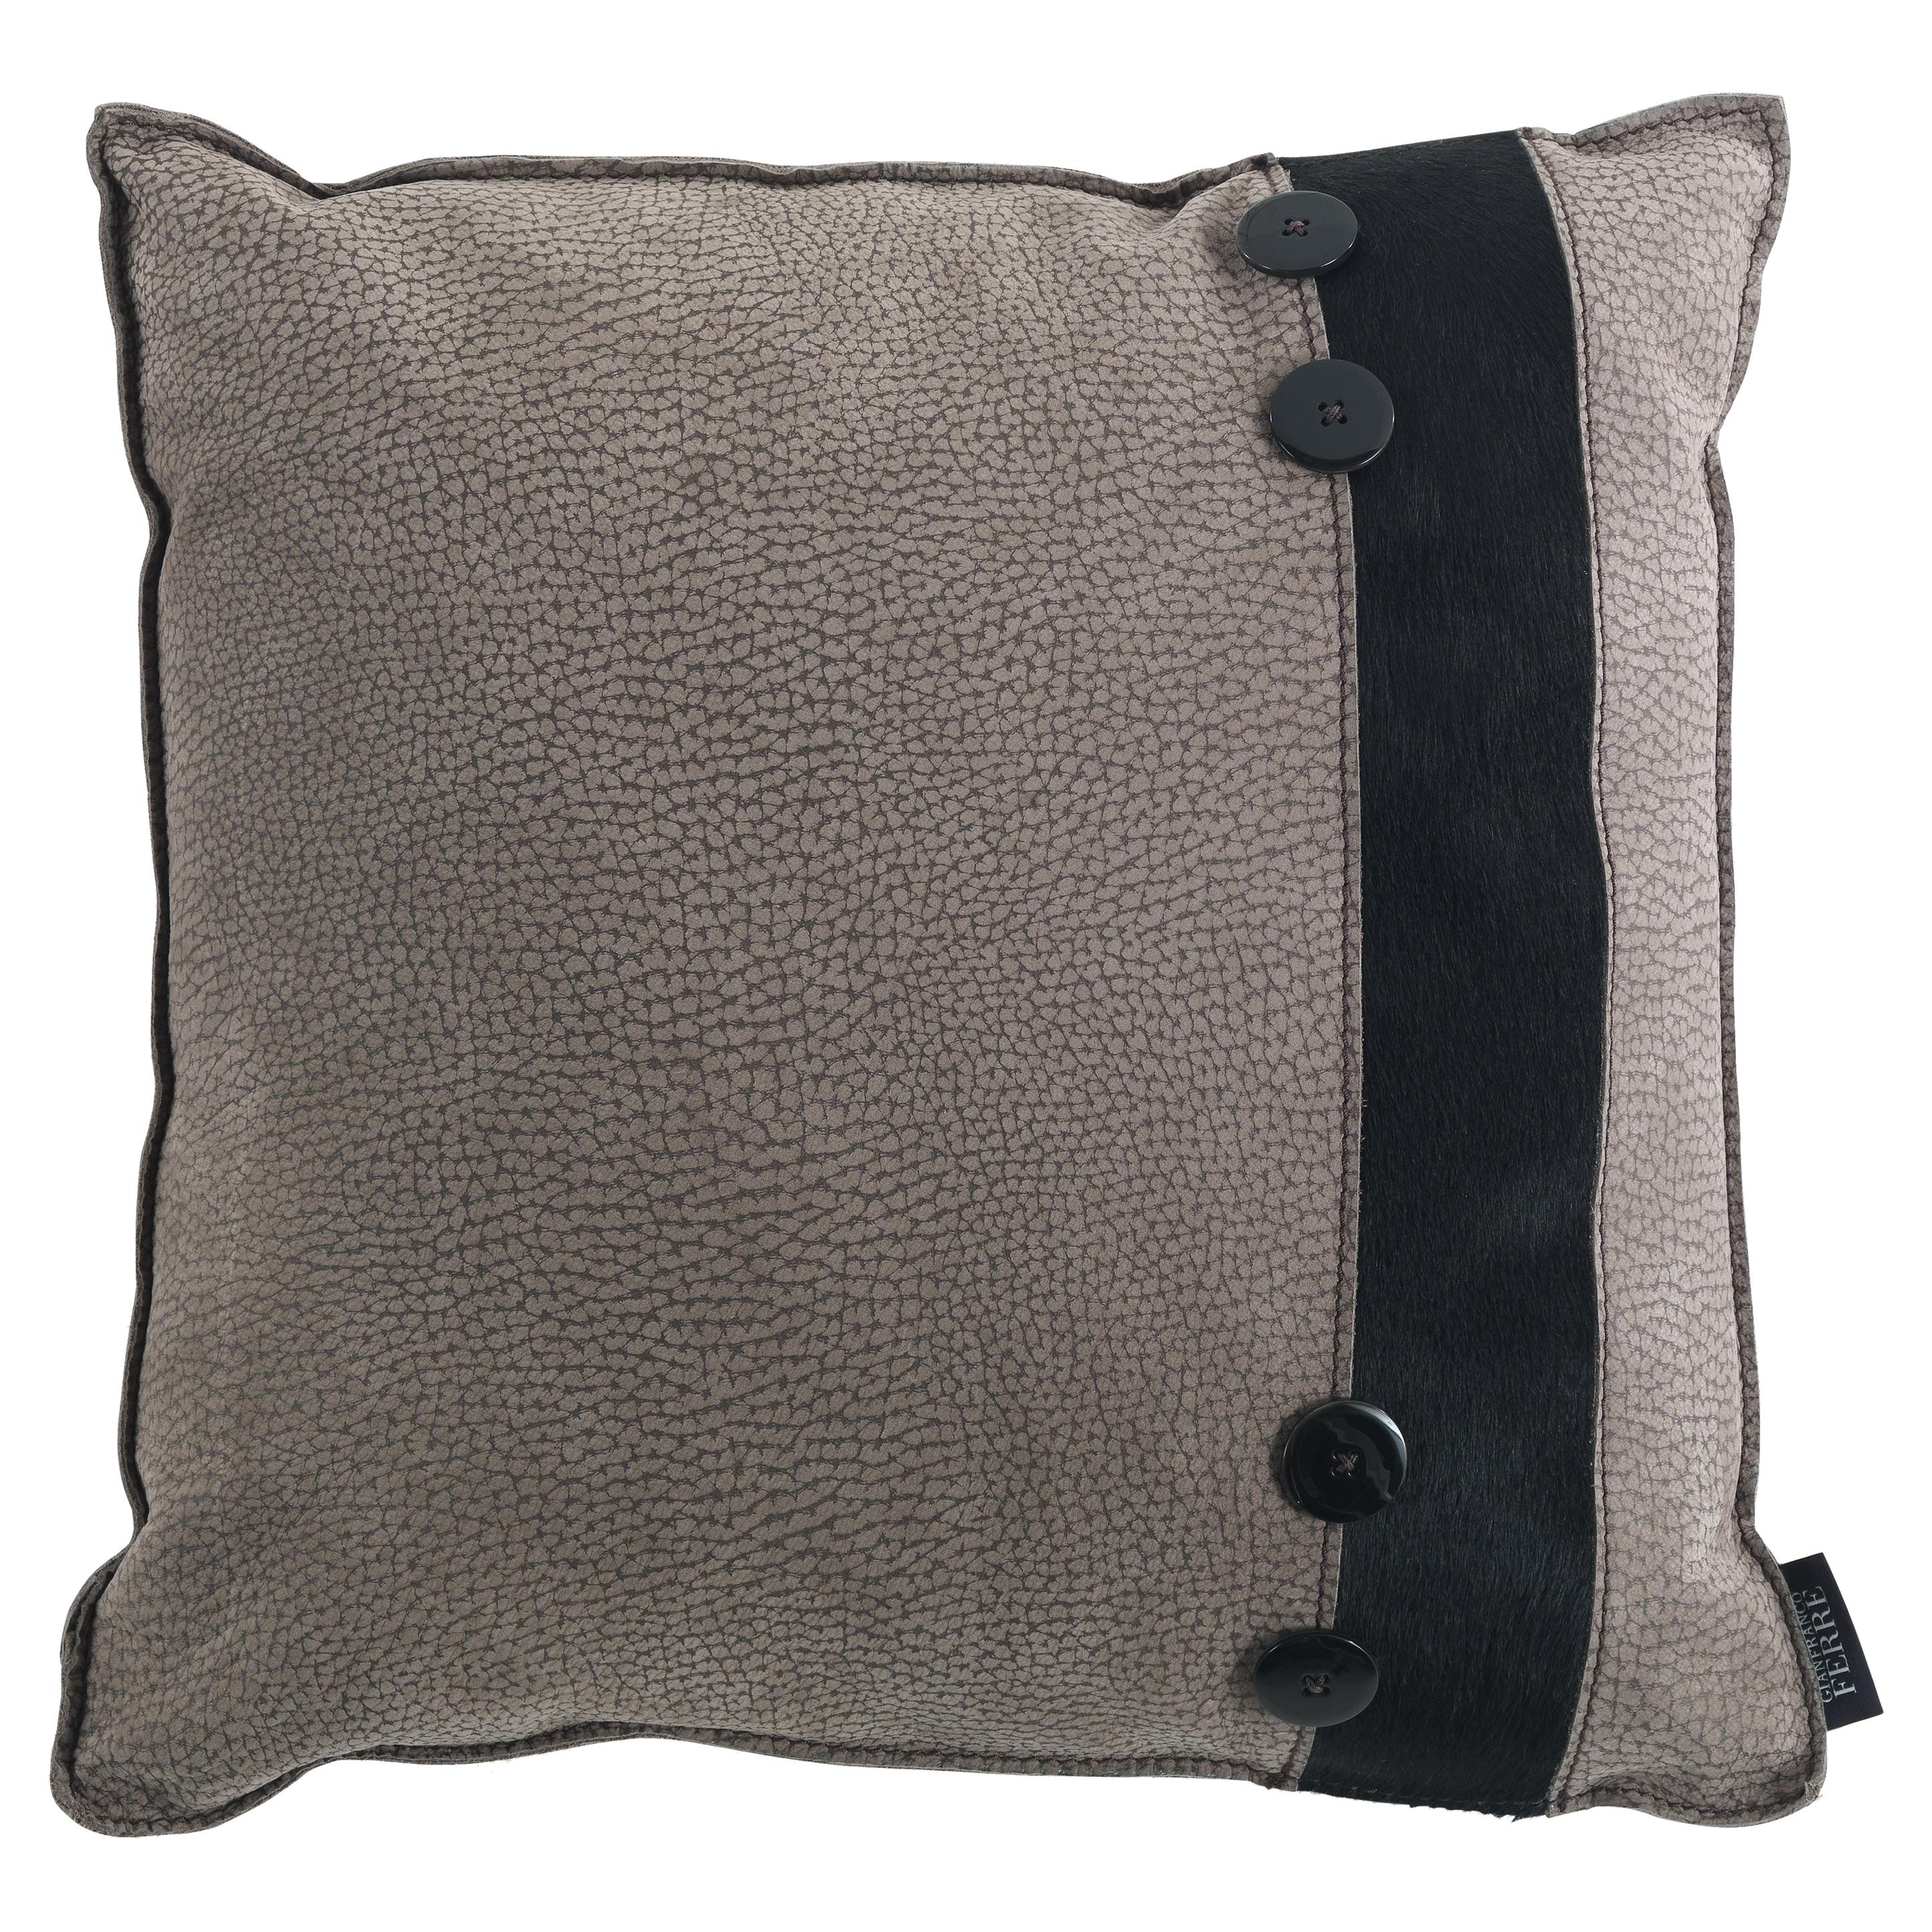 21st Century Hunter_1 Decorative Cushion in Leather by Gianfranco Ferré Home